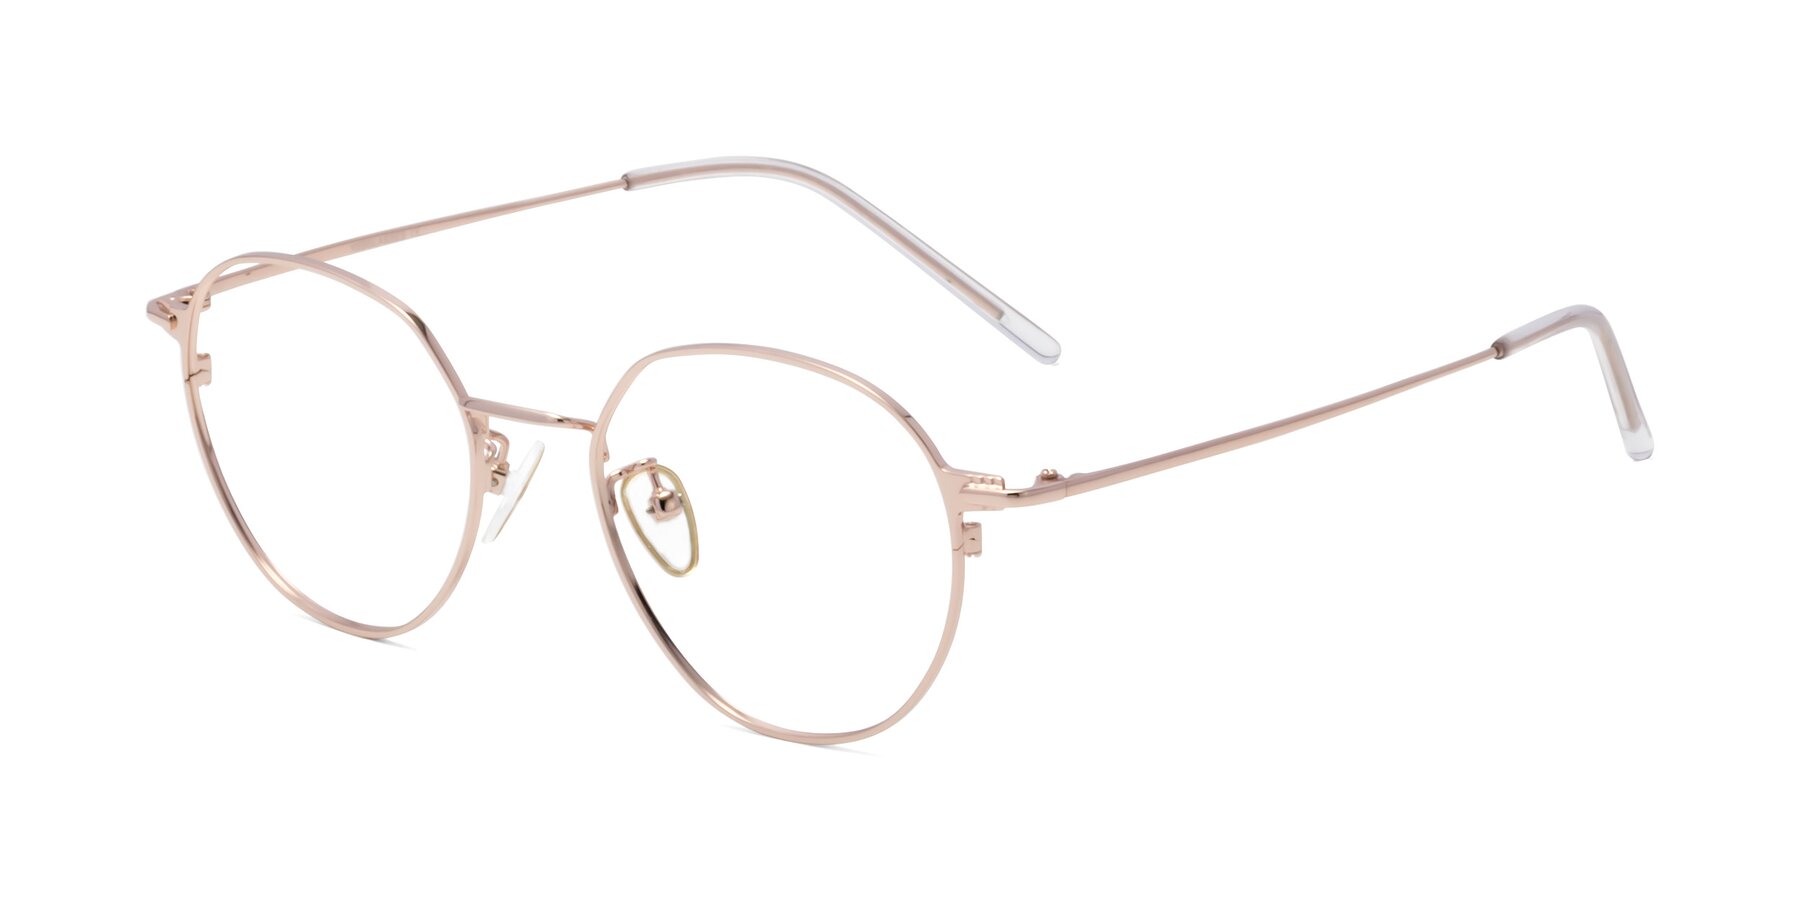 Angle of 18006 in Rose Gold with Clear Eyeglass Lenses